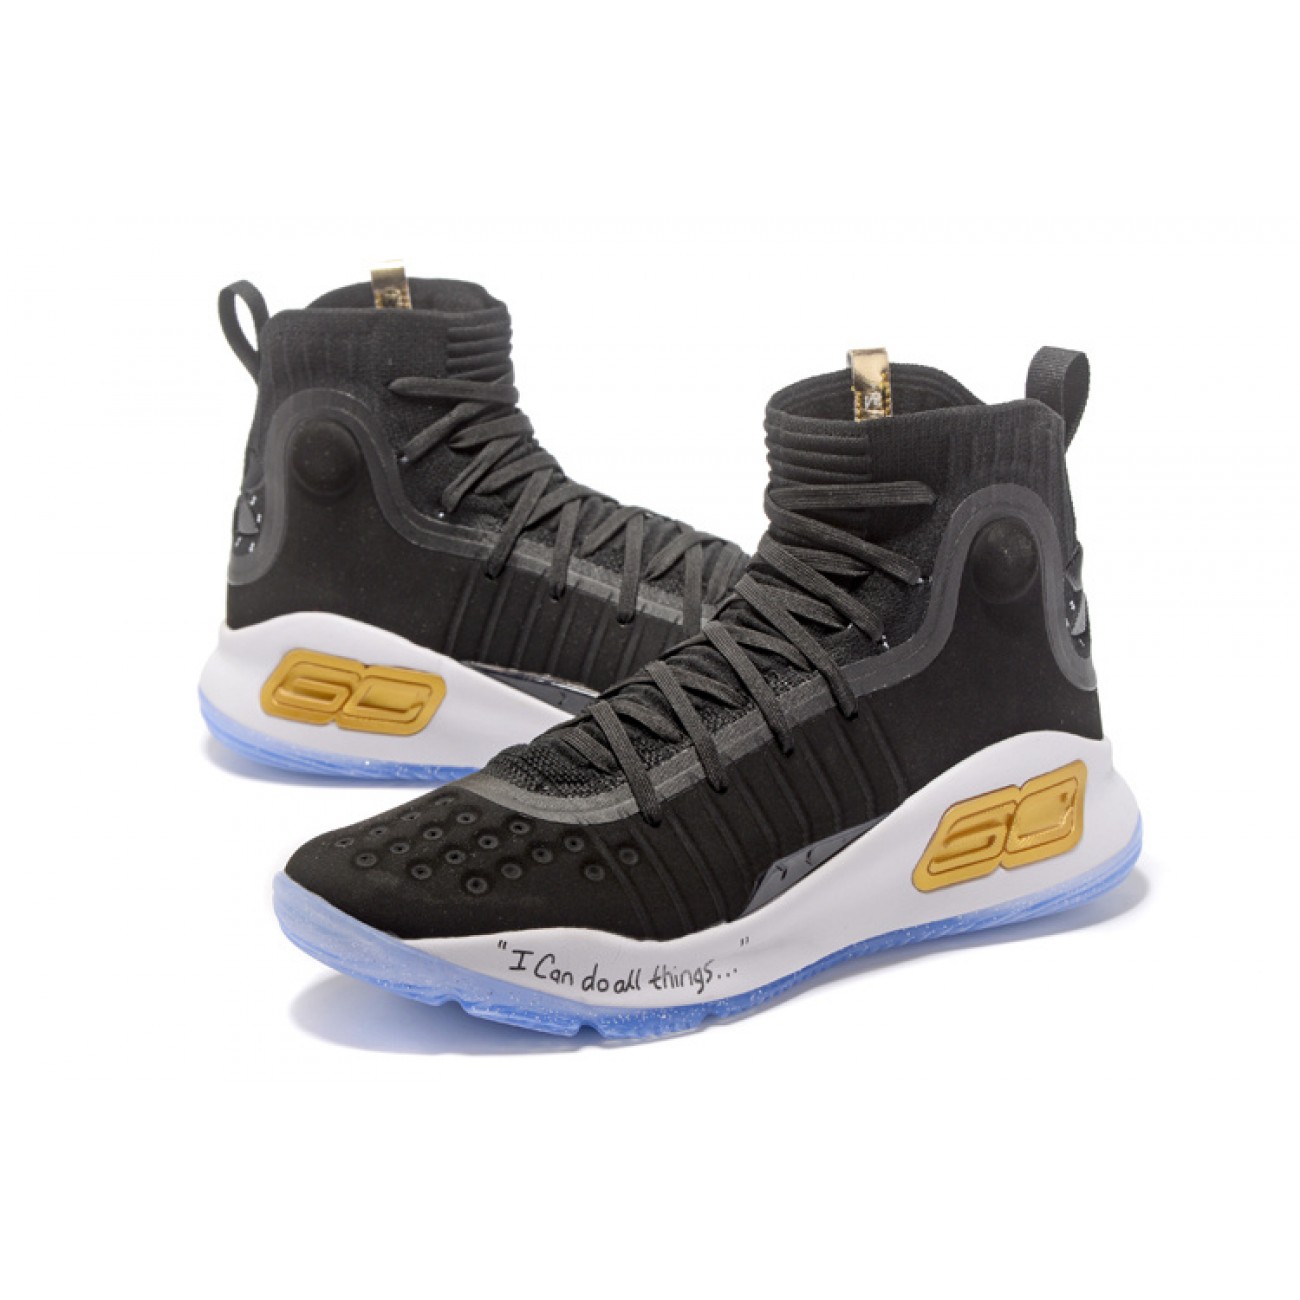 Under Armour UA Curry 4 "I Can Do All Things" Black/White/Gold